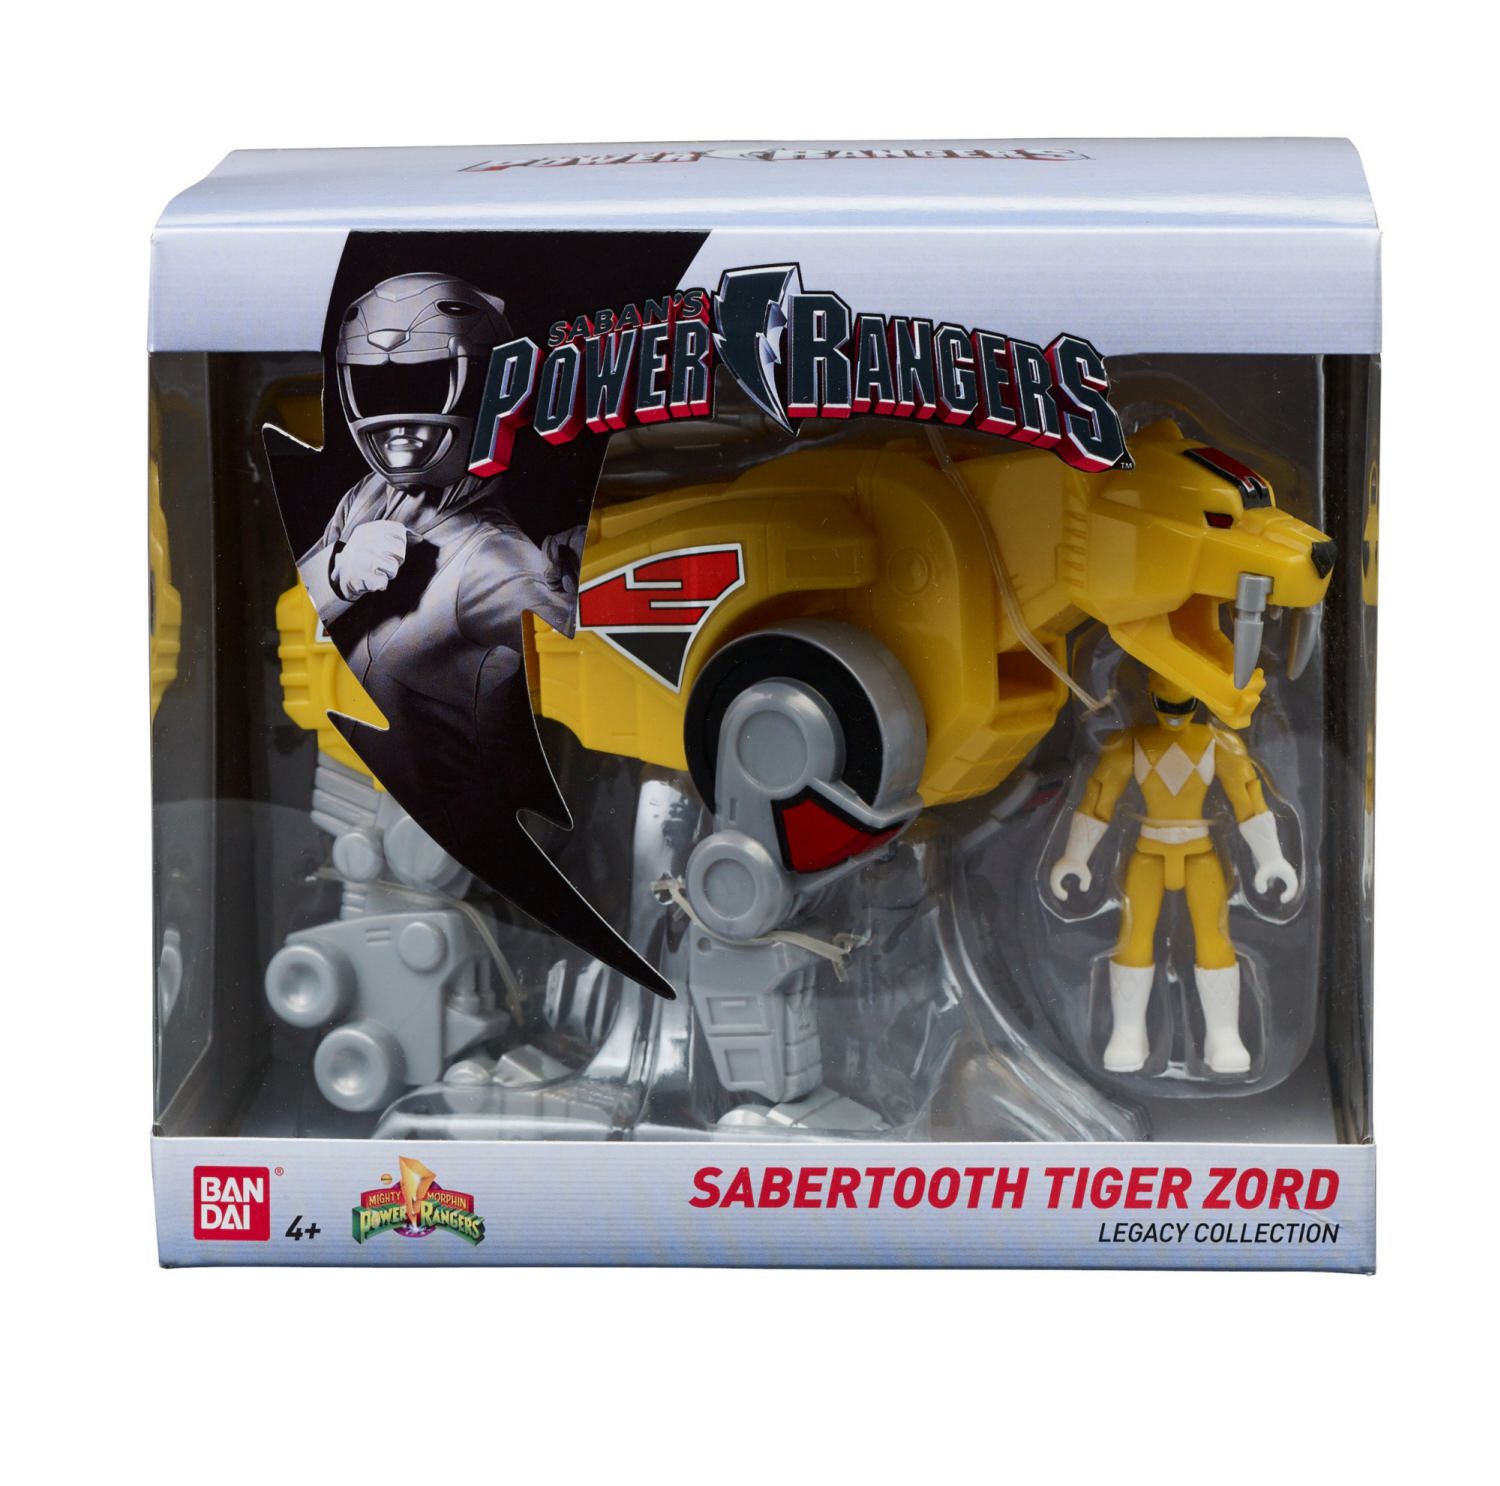 Power Rangers Legacy Mighty Morphin Sabertooth Tiger Zord Figure